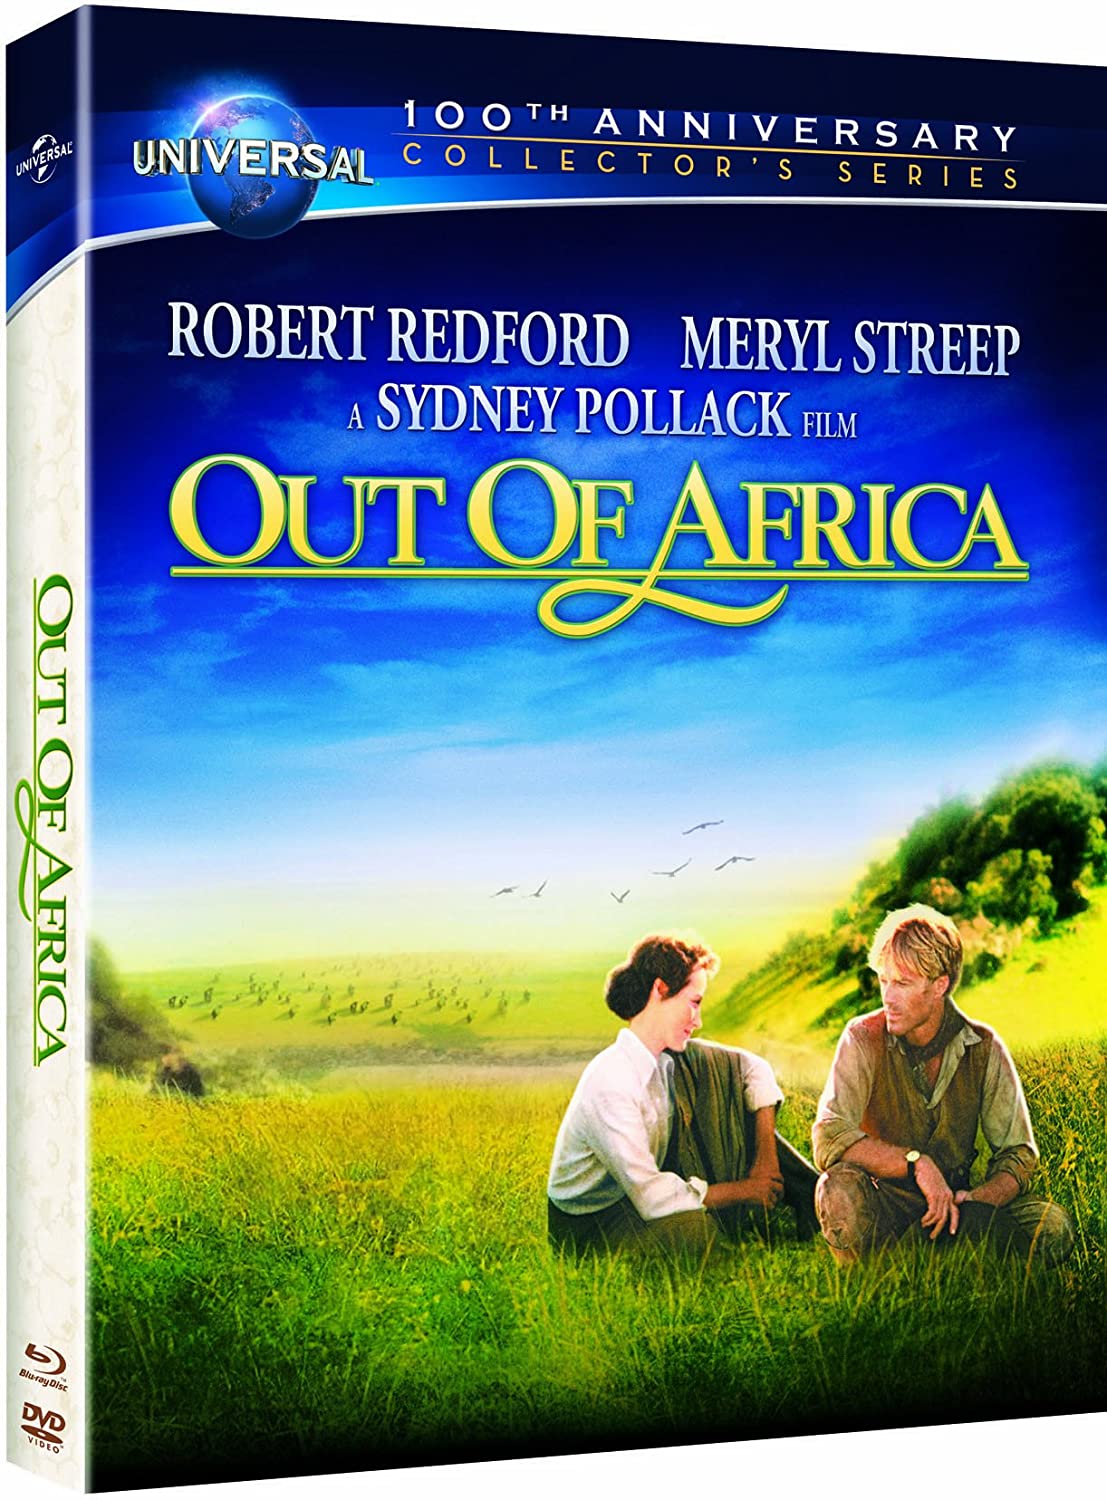 Out of Africa (1985) / Souvenirs d'Afrique (Universal's 100th Anniversary Limited Edition Collector's Series - Bilingue) [Blu-ray Book + DVD + Digital Copy] (Bilingual)